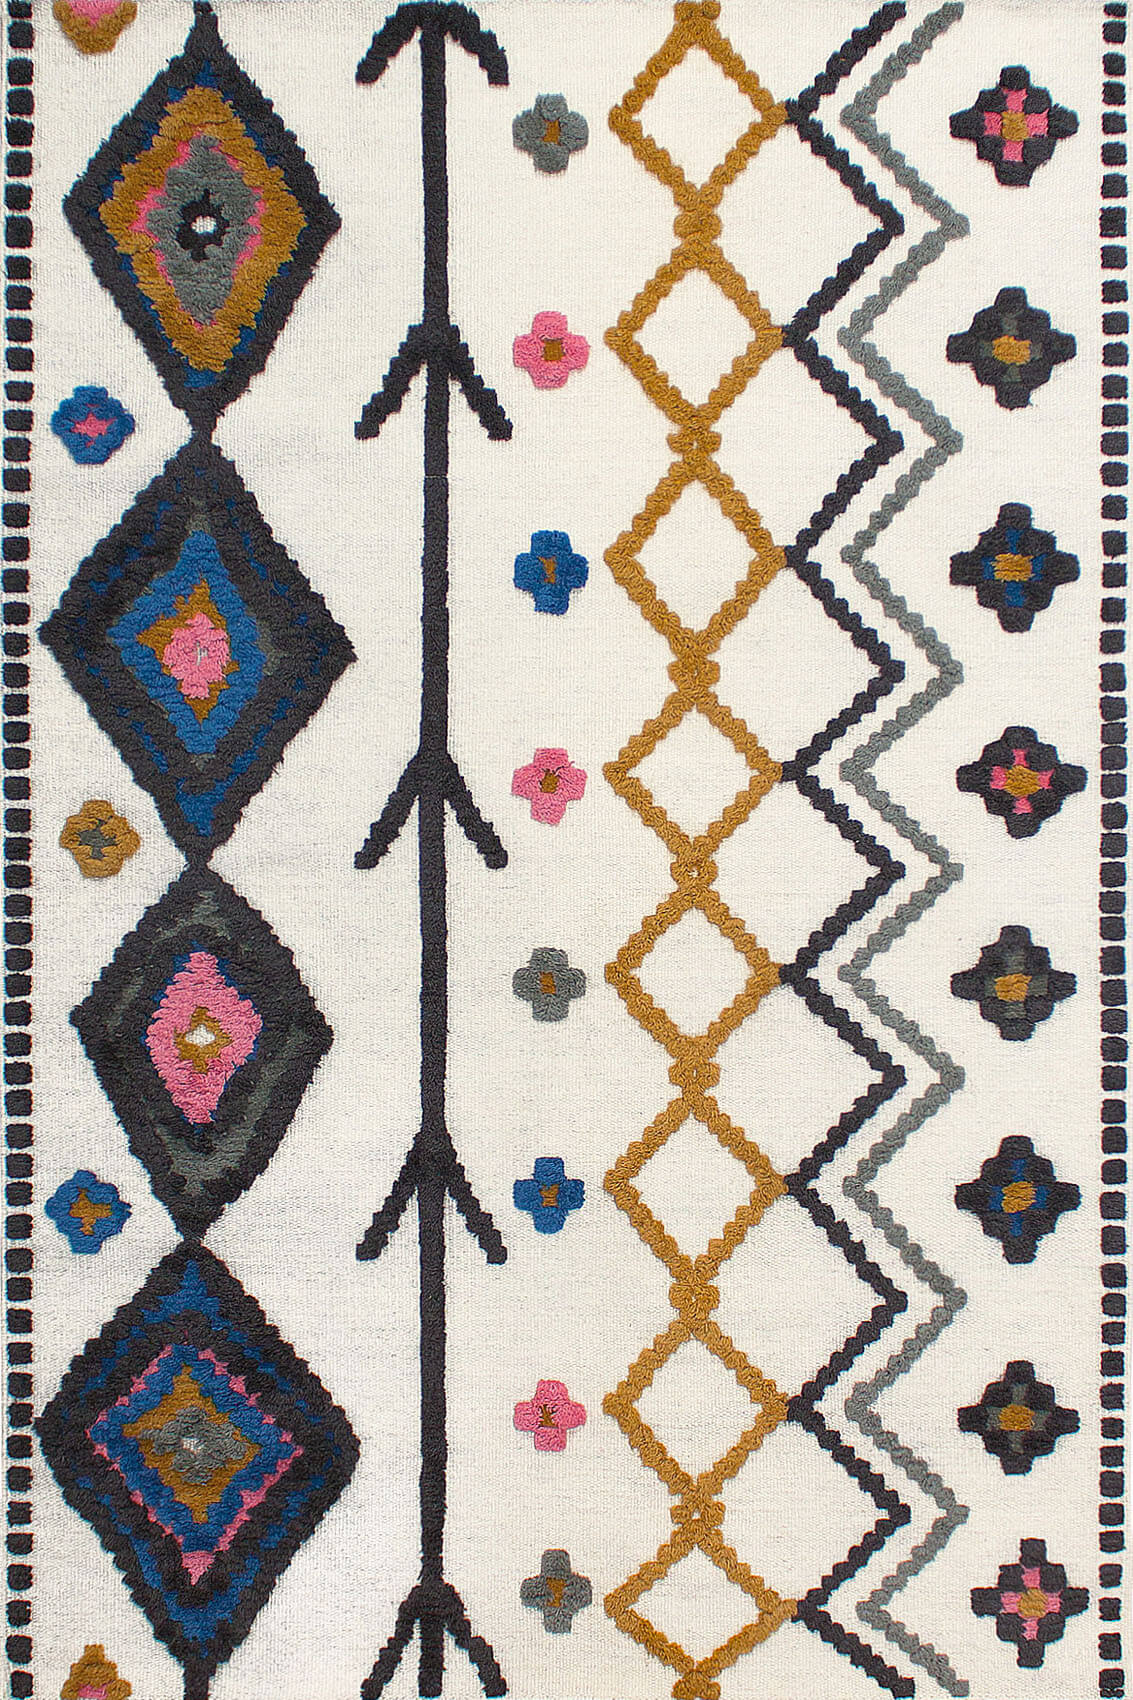 Gipsy Rug by Serge Lesage ☞ Size: 80 x 200 cm